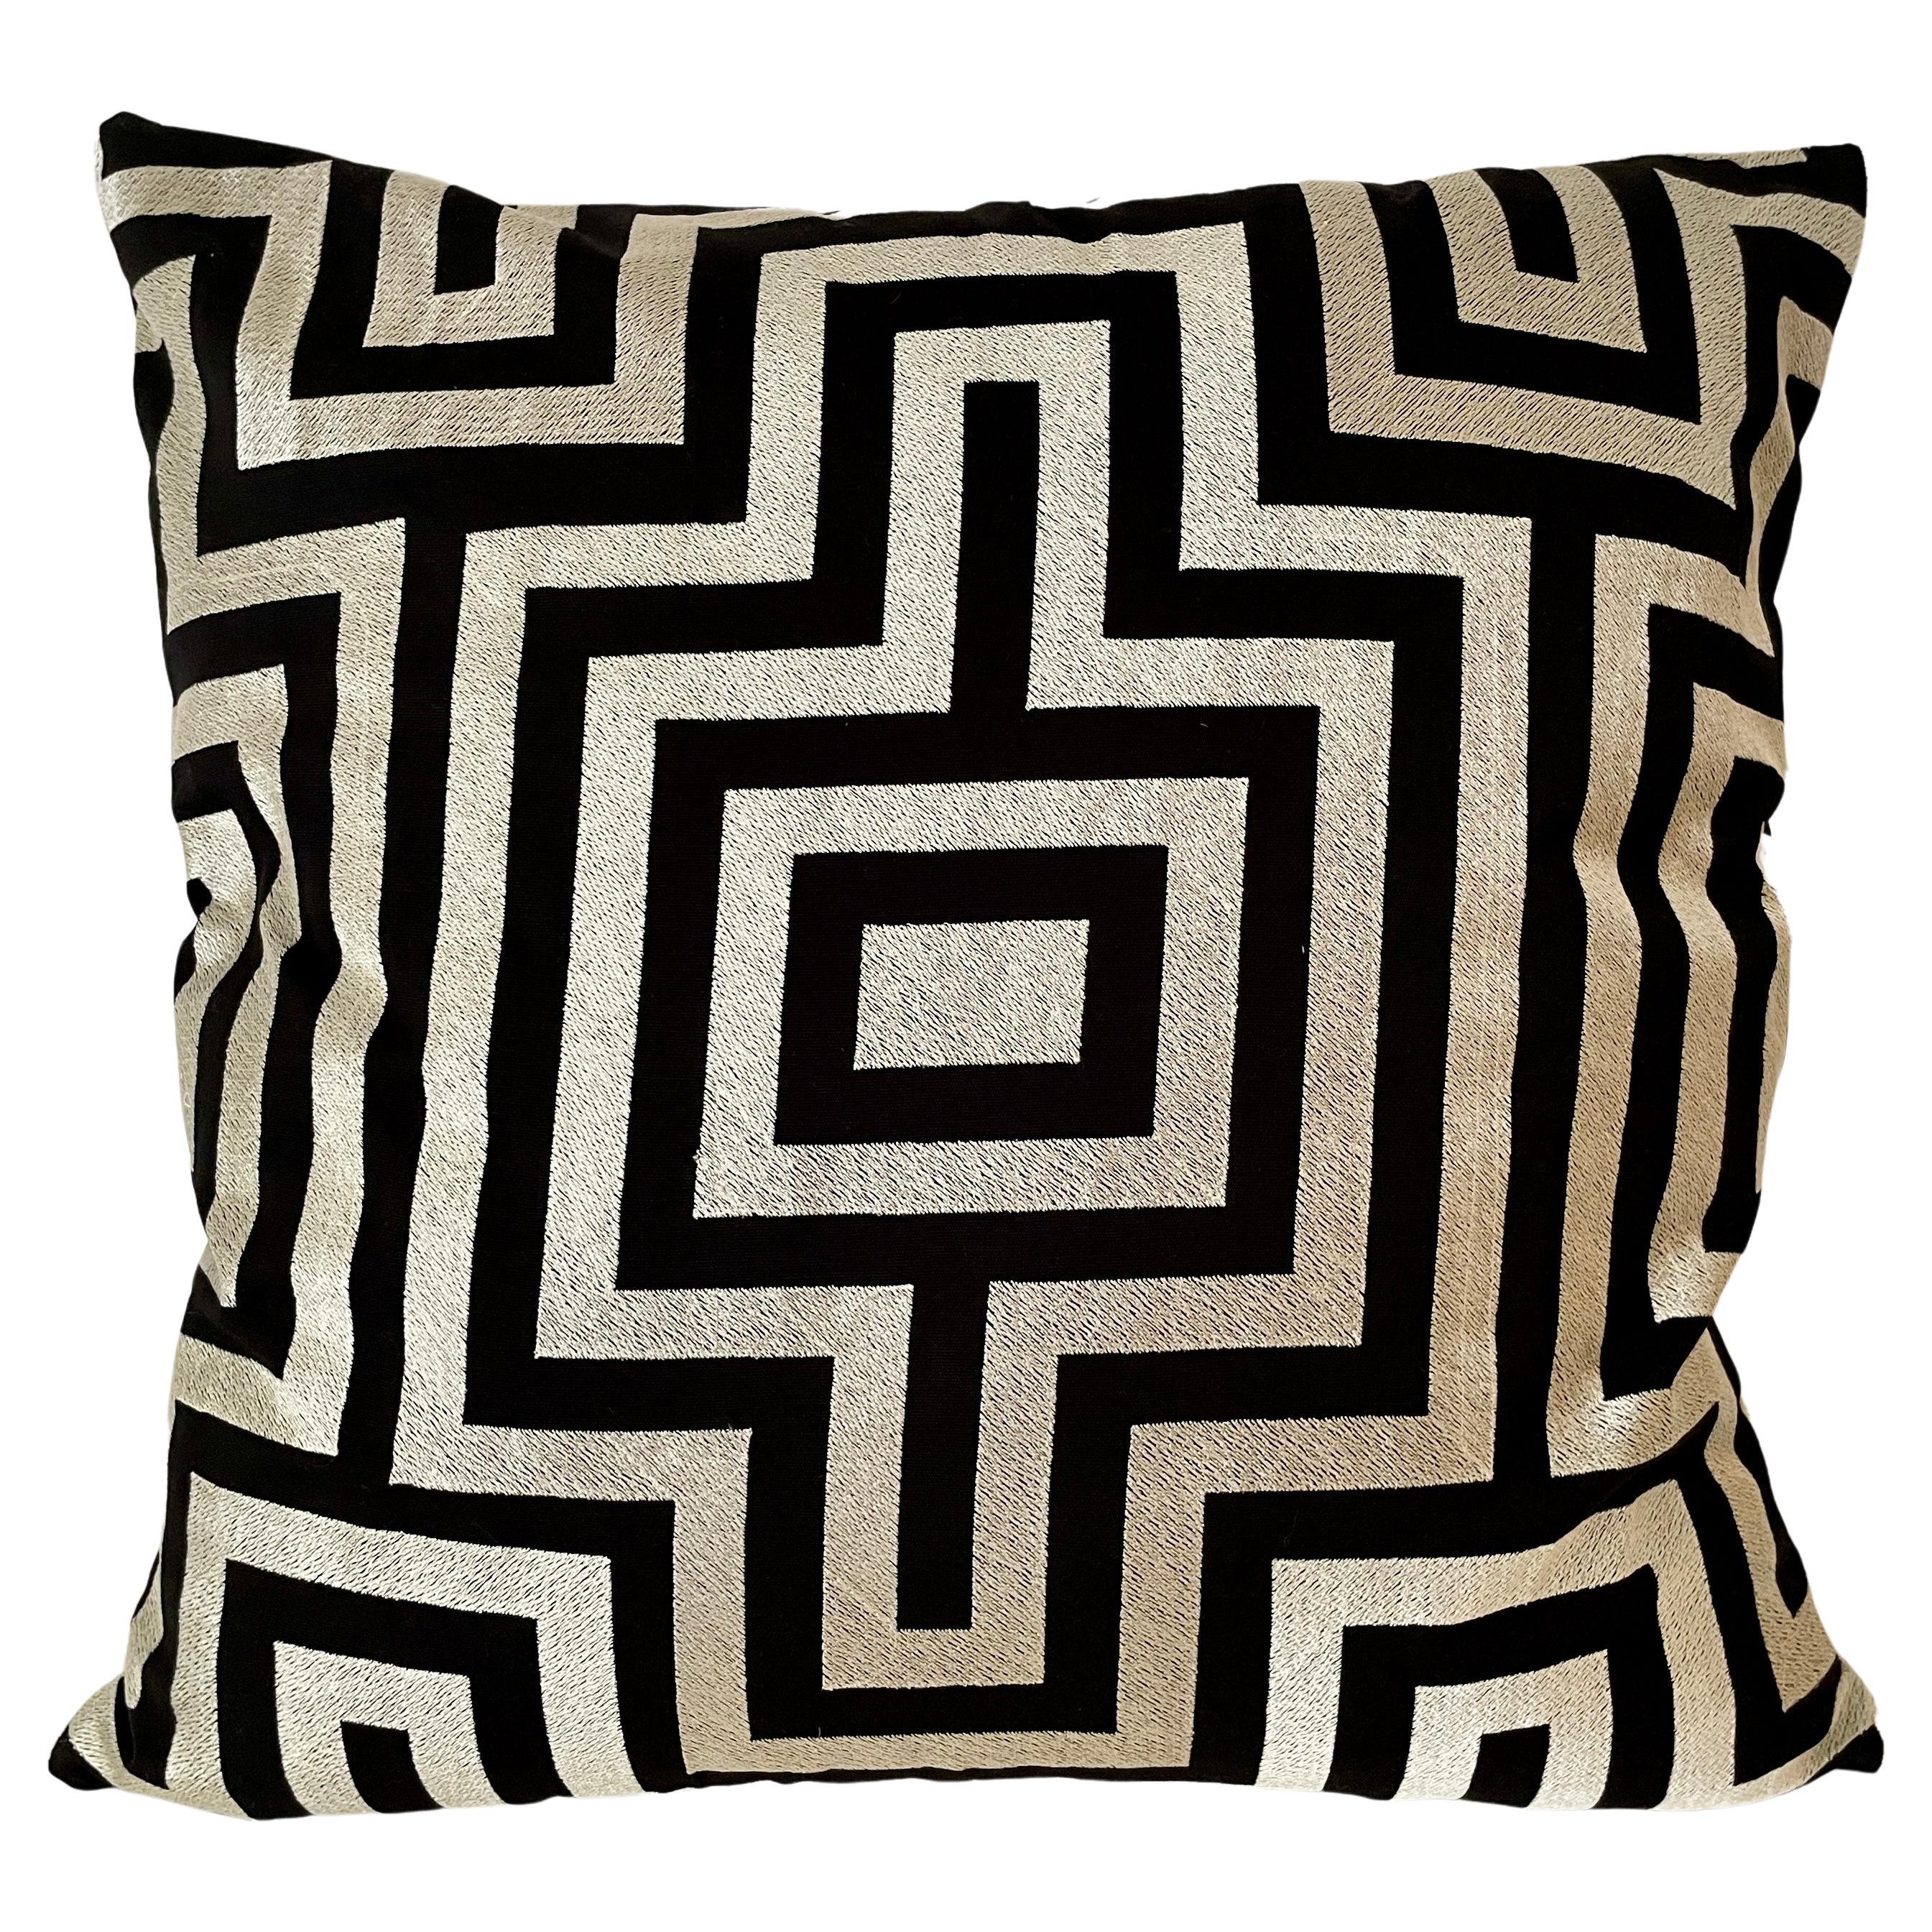 Hand Embroidered Geometric Pattern All Down Pillow